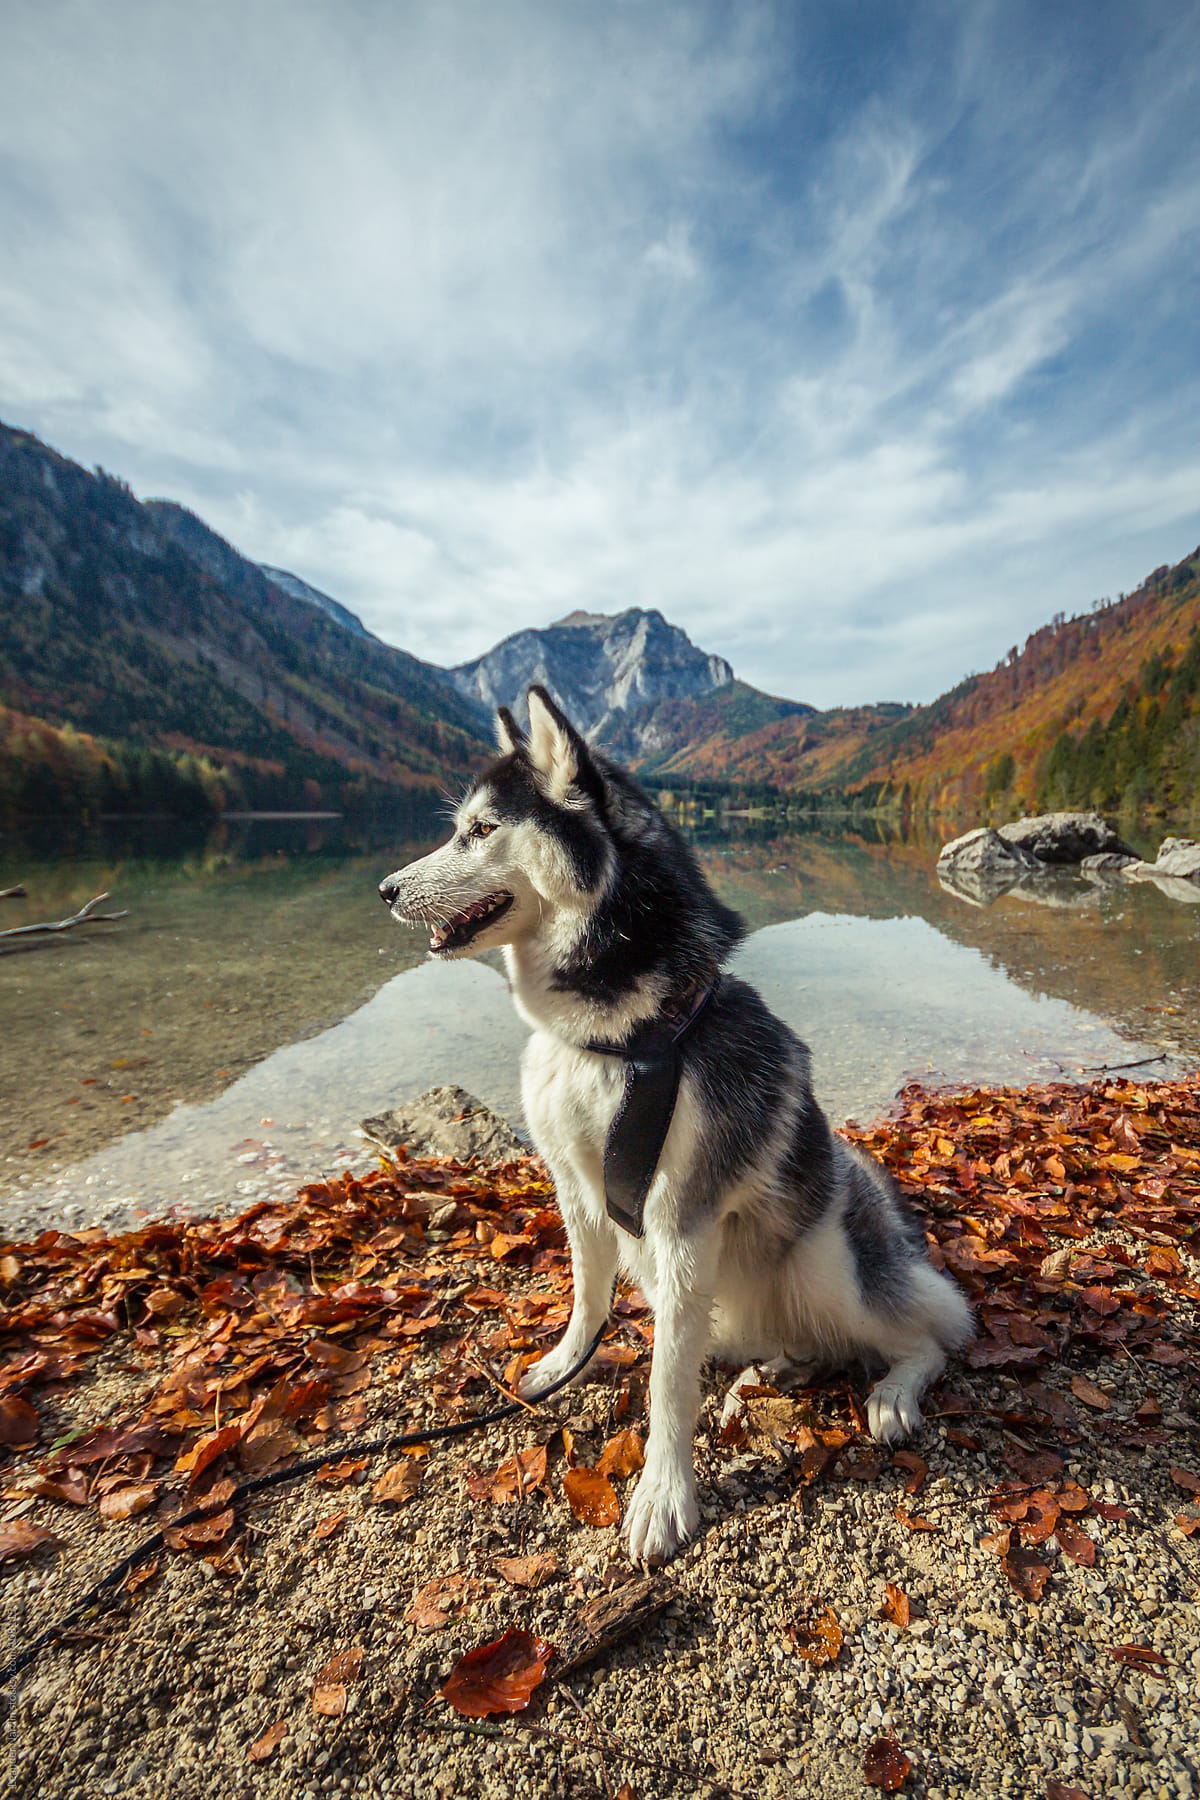 husky is sitting in an autumnal landscape scenery